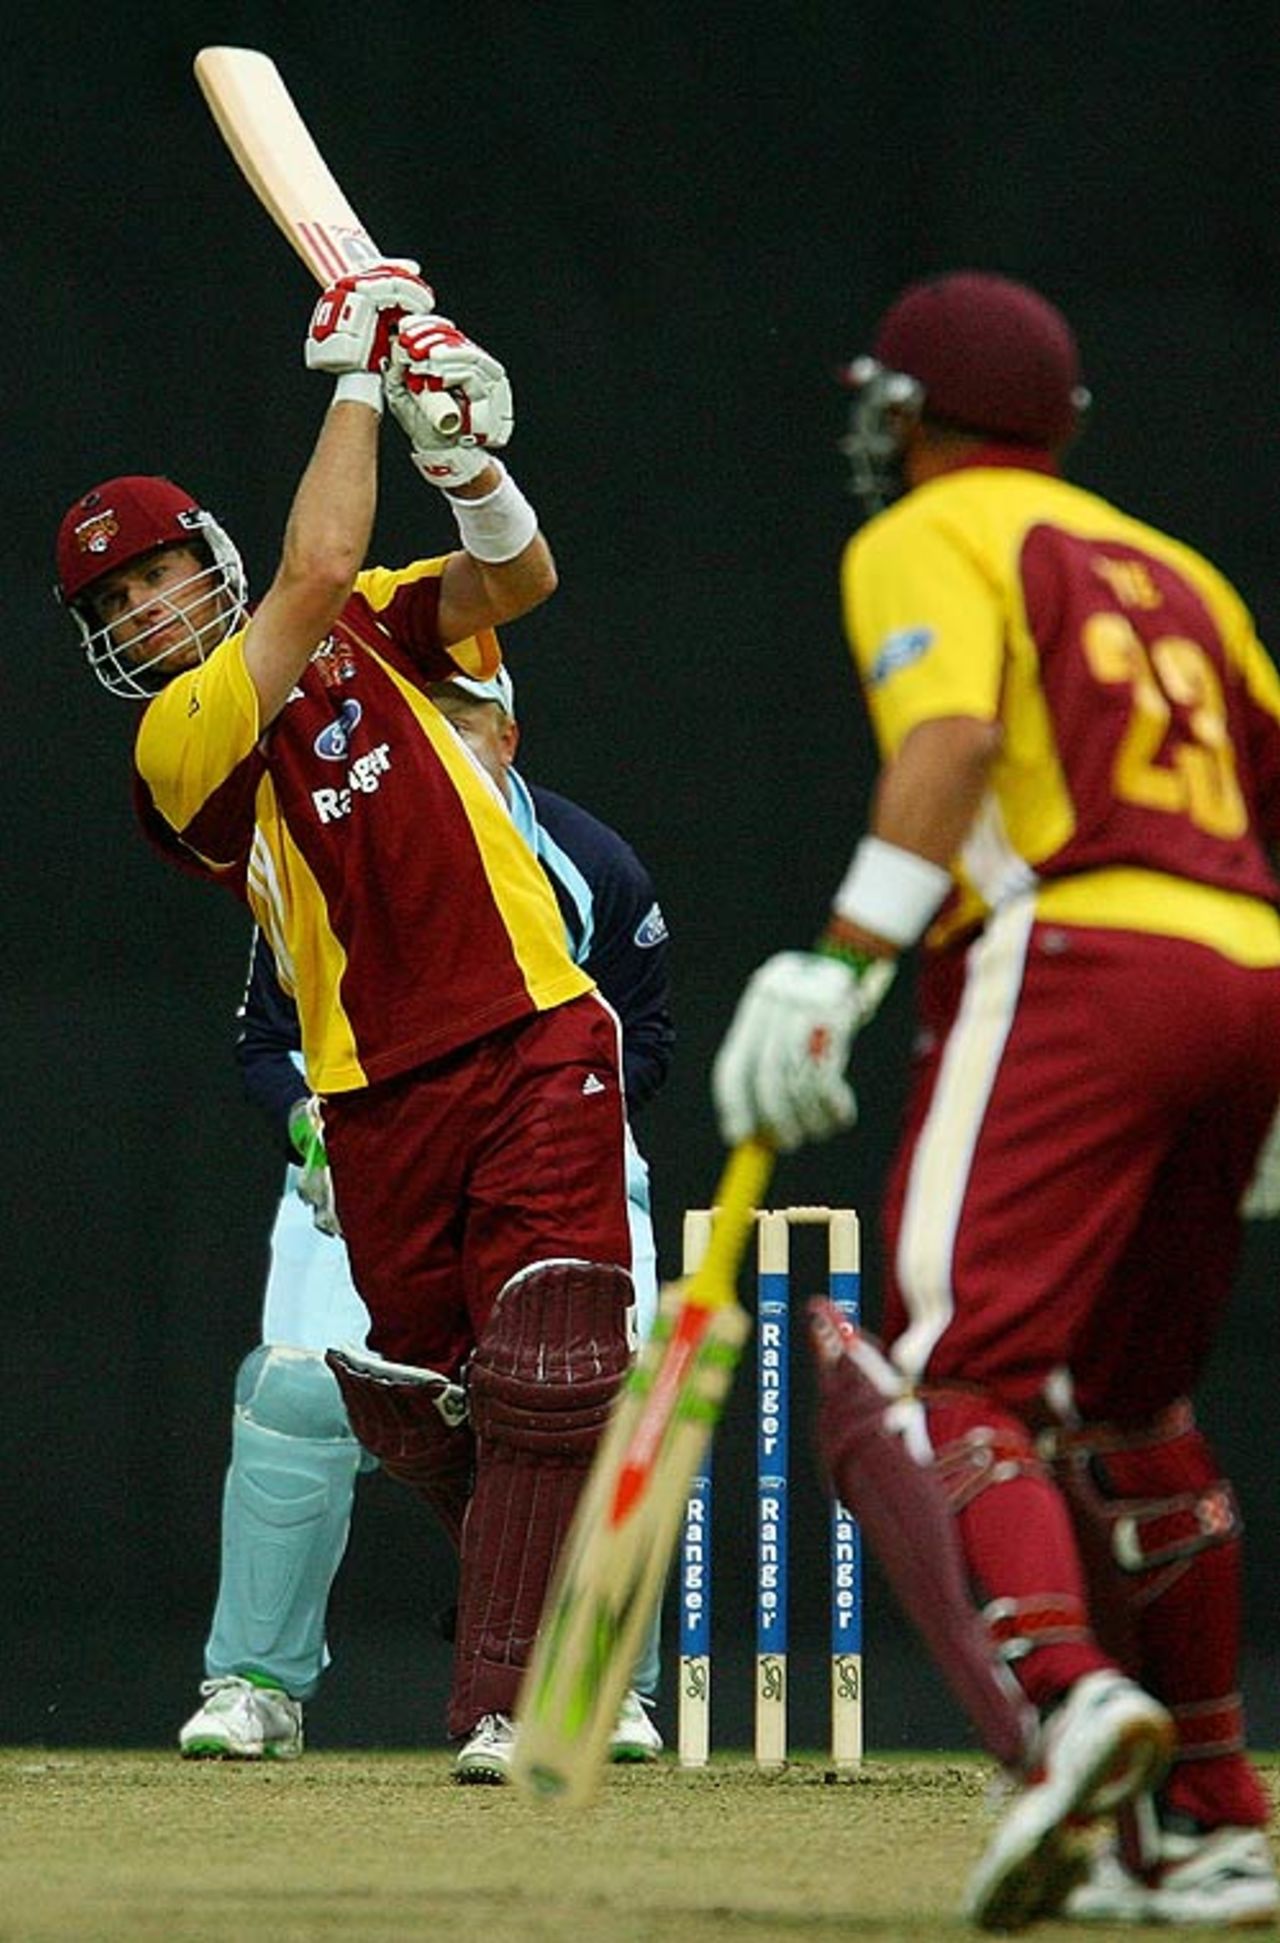 Ryan Broad drives confidently on his way to a half-century, New South Wales v Queensland, FR Cup, Sydney, October 24, 2007